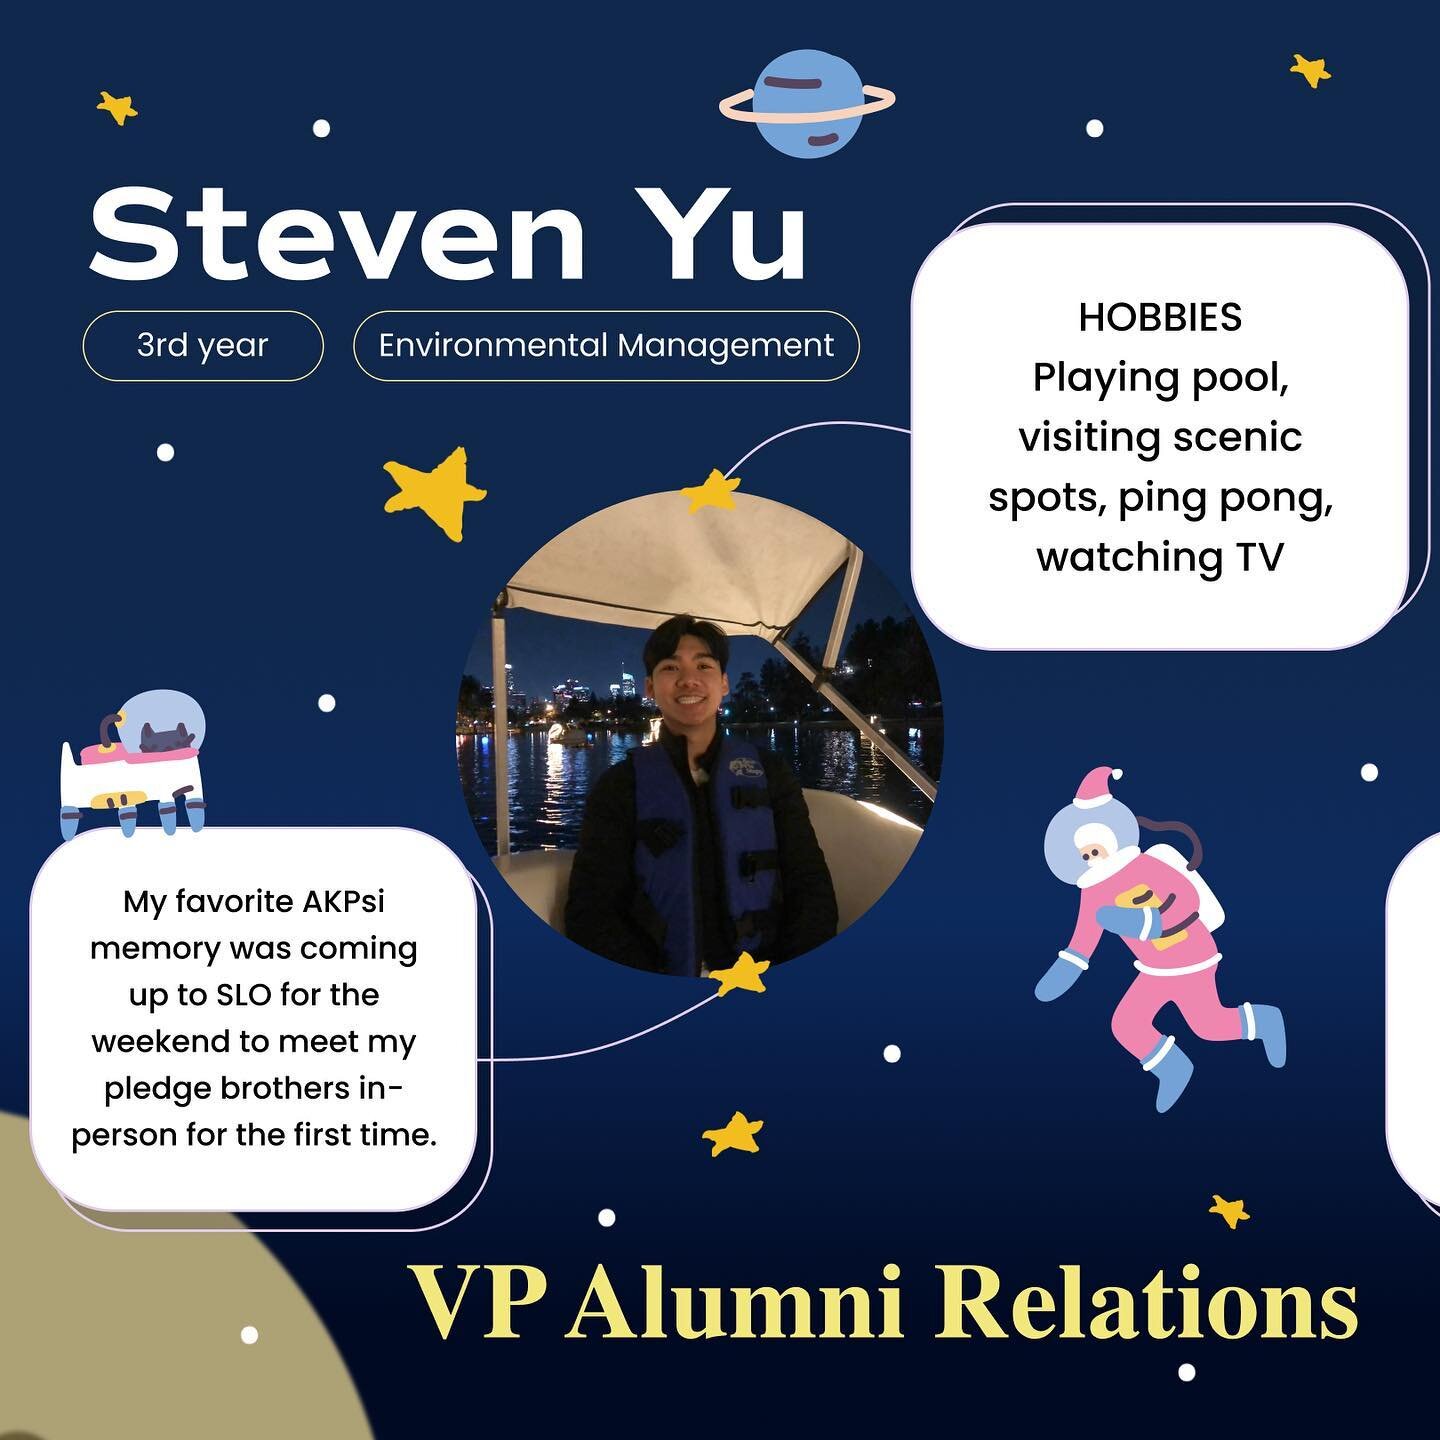 It&rsquo;s time to introduce our executive board for the upcoming year! Here are our Vice Presidents: 

Steven Yu, VP of Alumni Relations
Sarah Cao, VP of Communications
Cameron Chow, VP of Finance 
Brandon Brownell, VP of Technology 
Chloe Peng, Co-